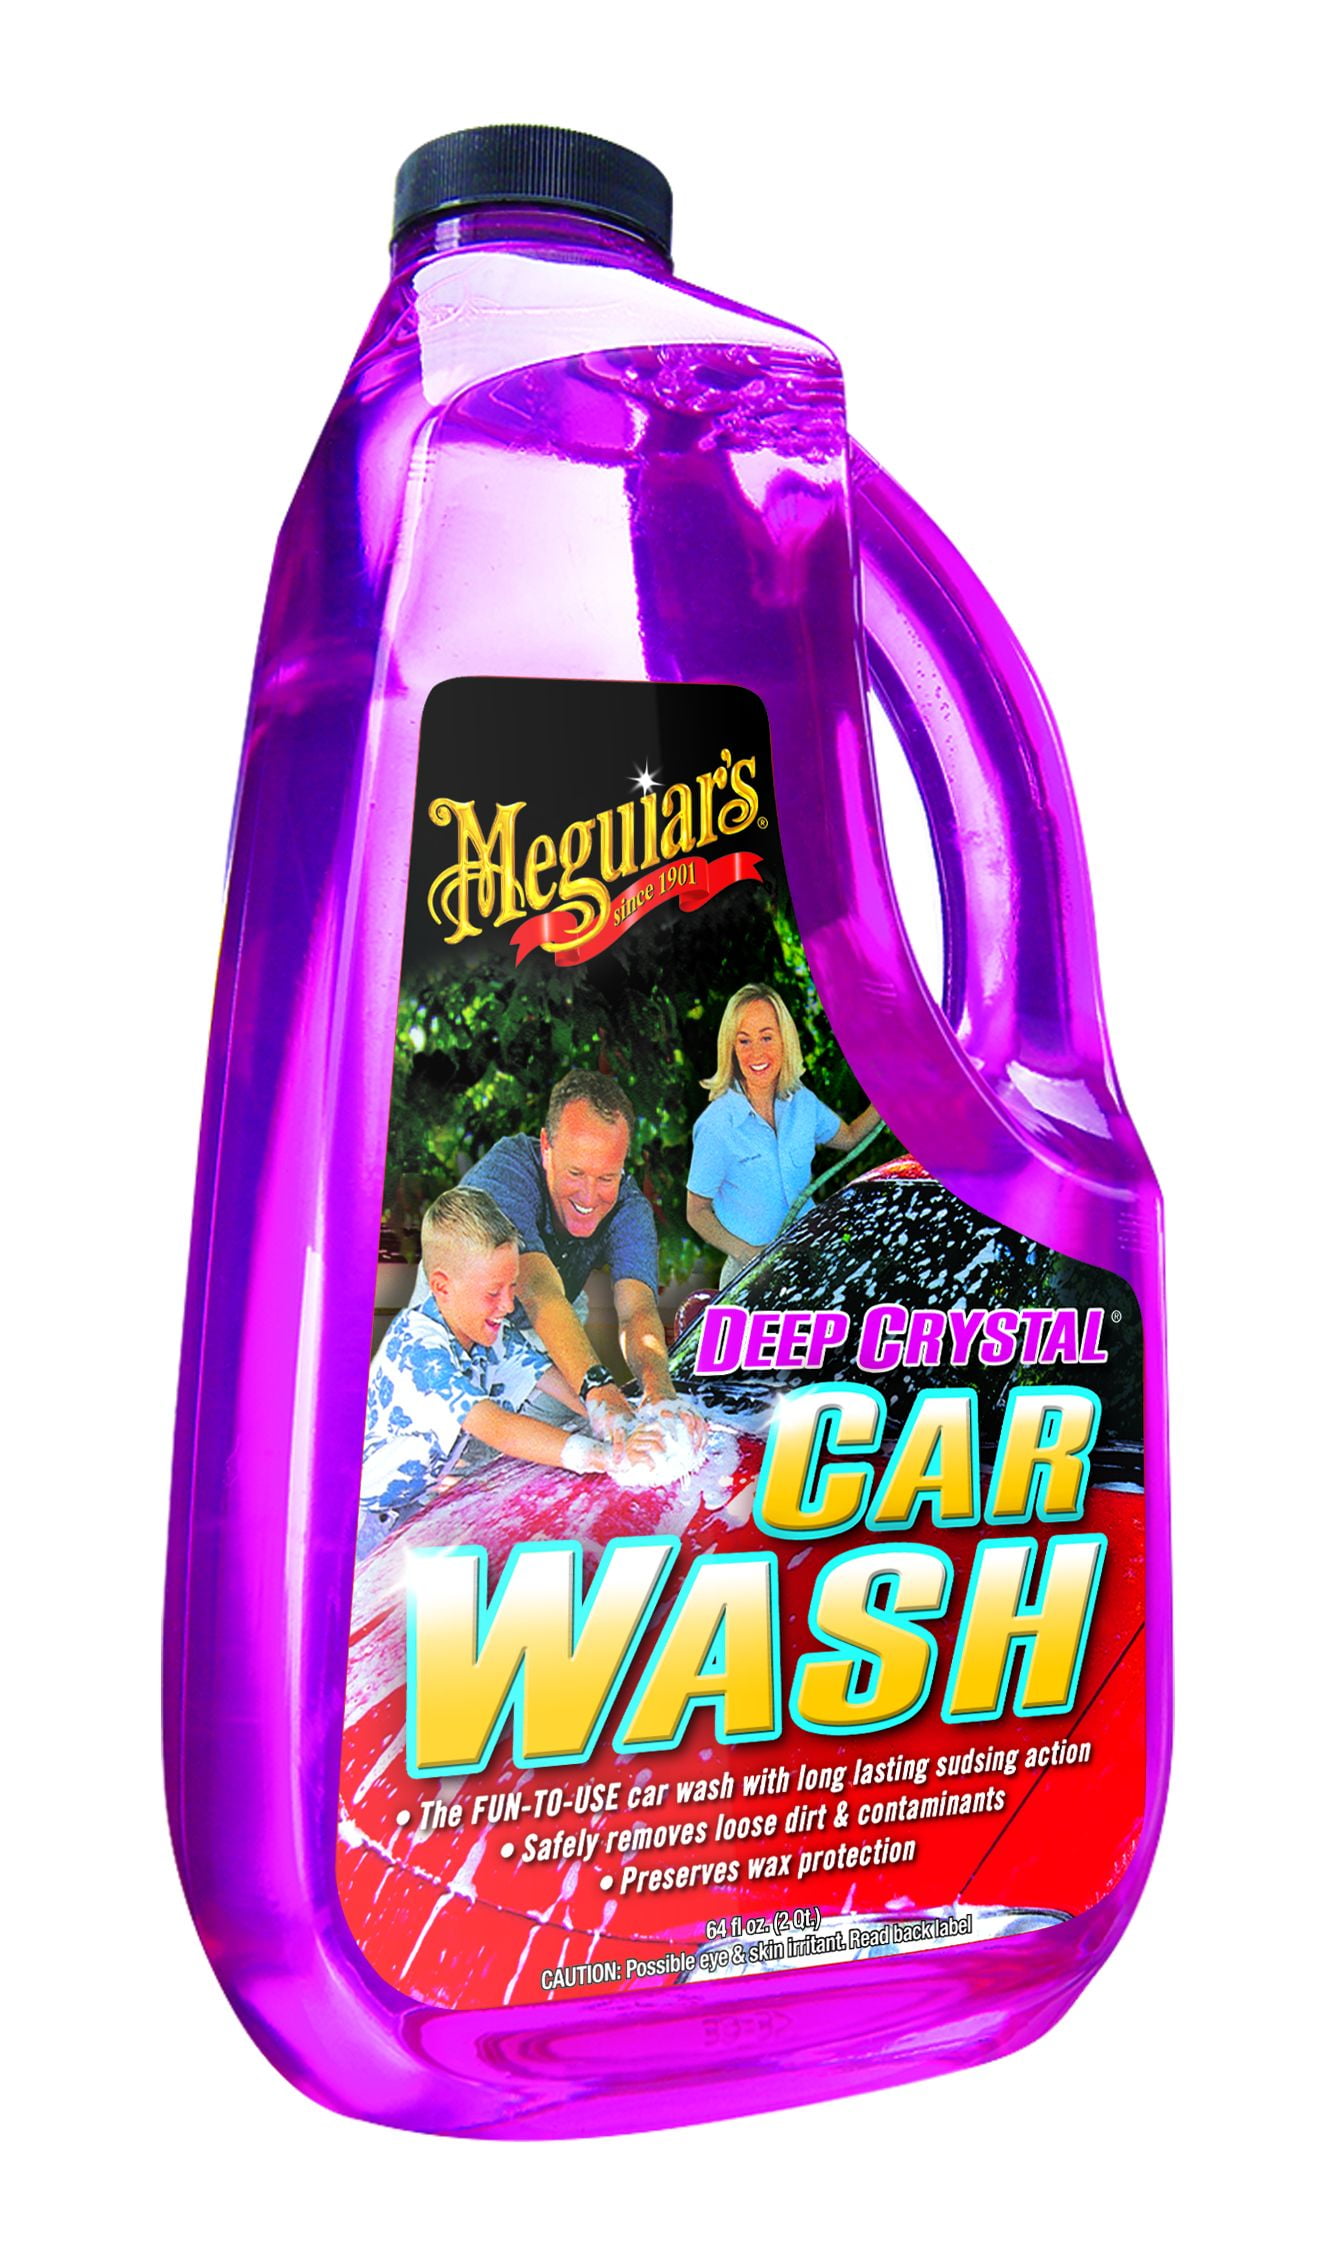 Meguiar's Quik Detailer Mist and Wipe - This Easy-to-Use Car Detailing Spray Is The Ideal Way to Lightly Clean and Enhance Dad's Car This Father's Day